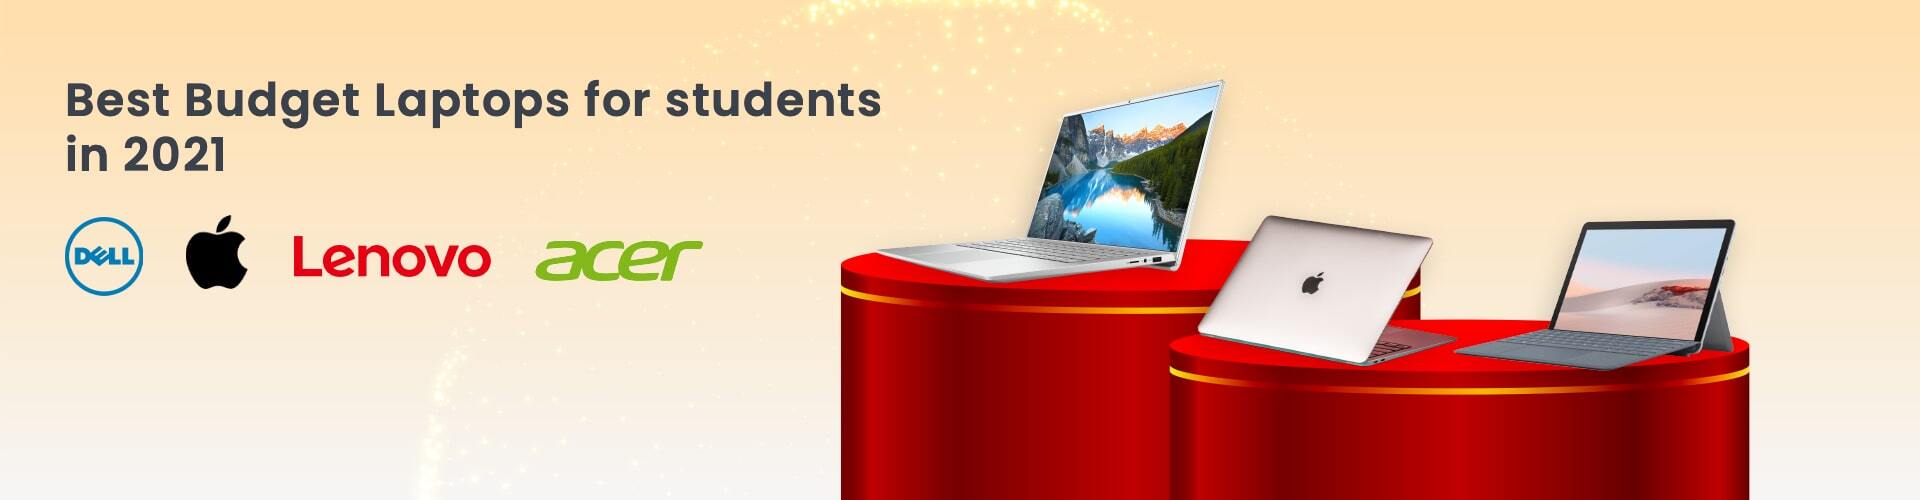 Best Budget Laptops for students in 2021